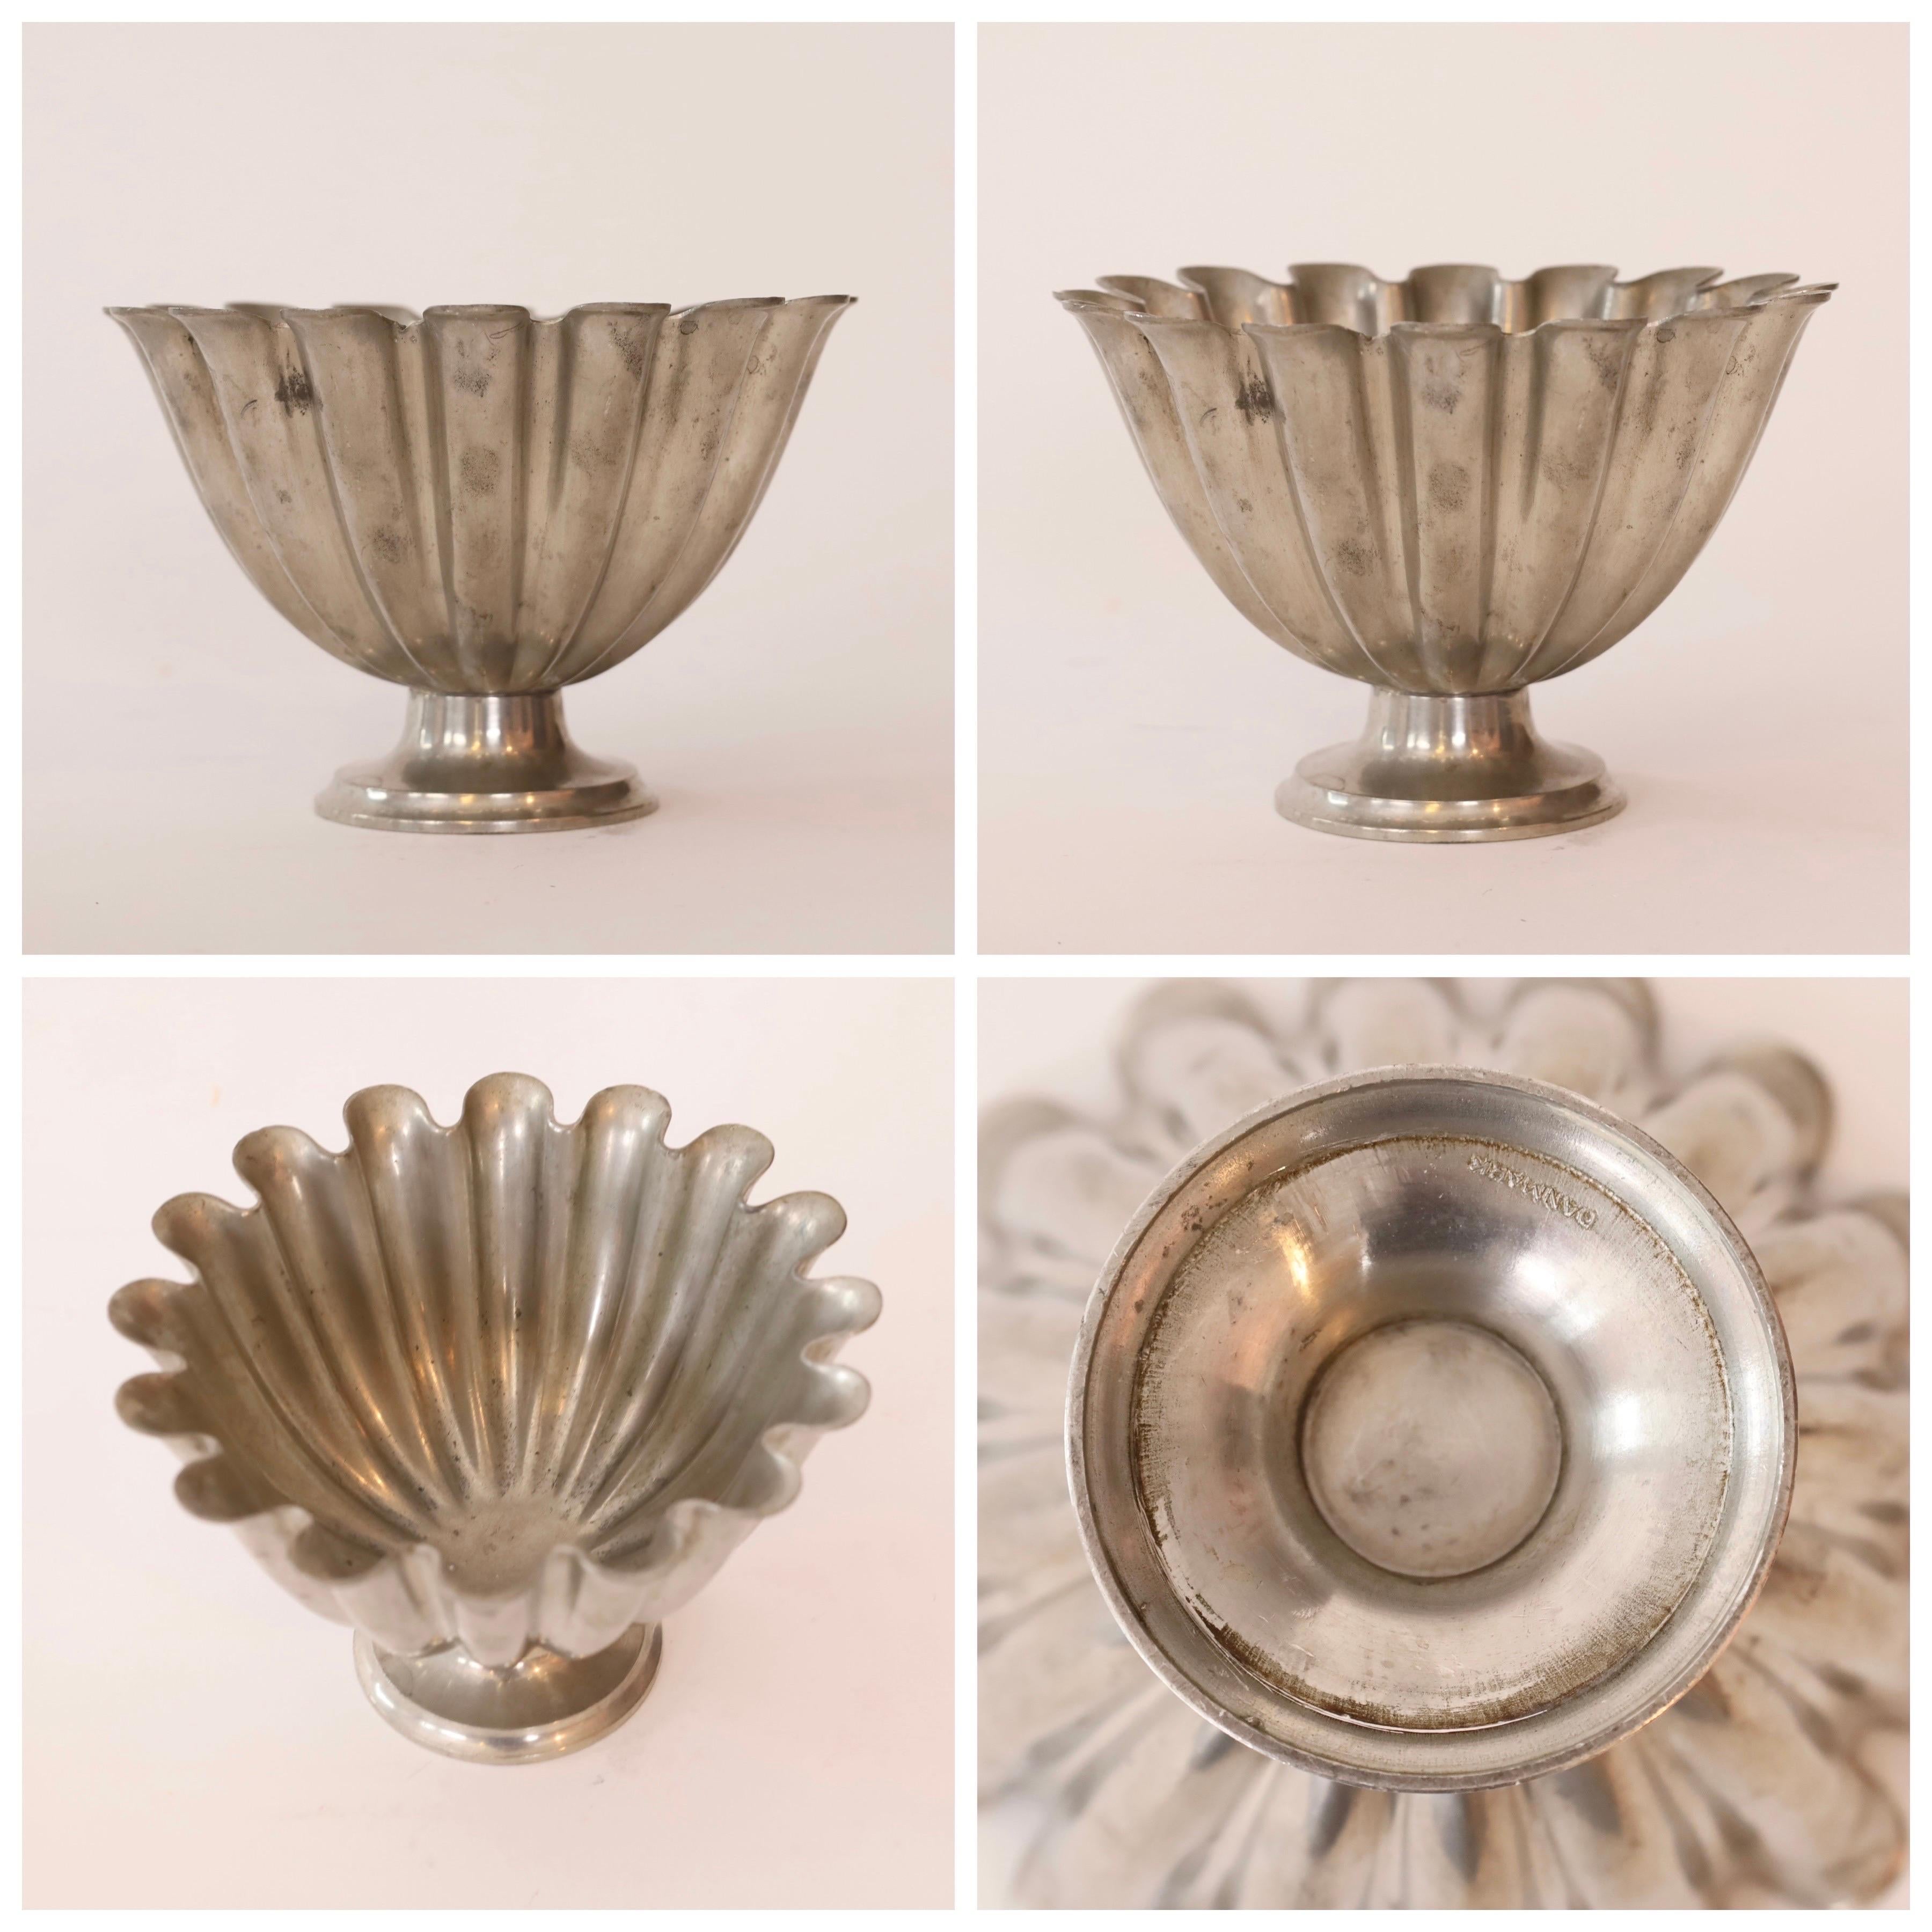 Pair of Scalloped pedestal pewter bowls by Just Andersen 1920s, Denmark For Sale 2